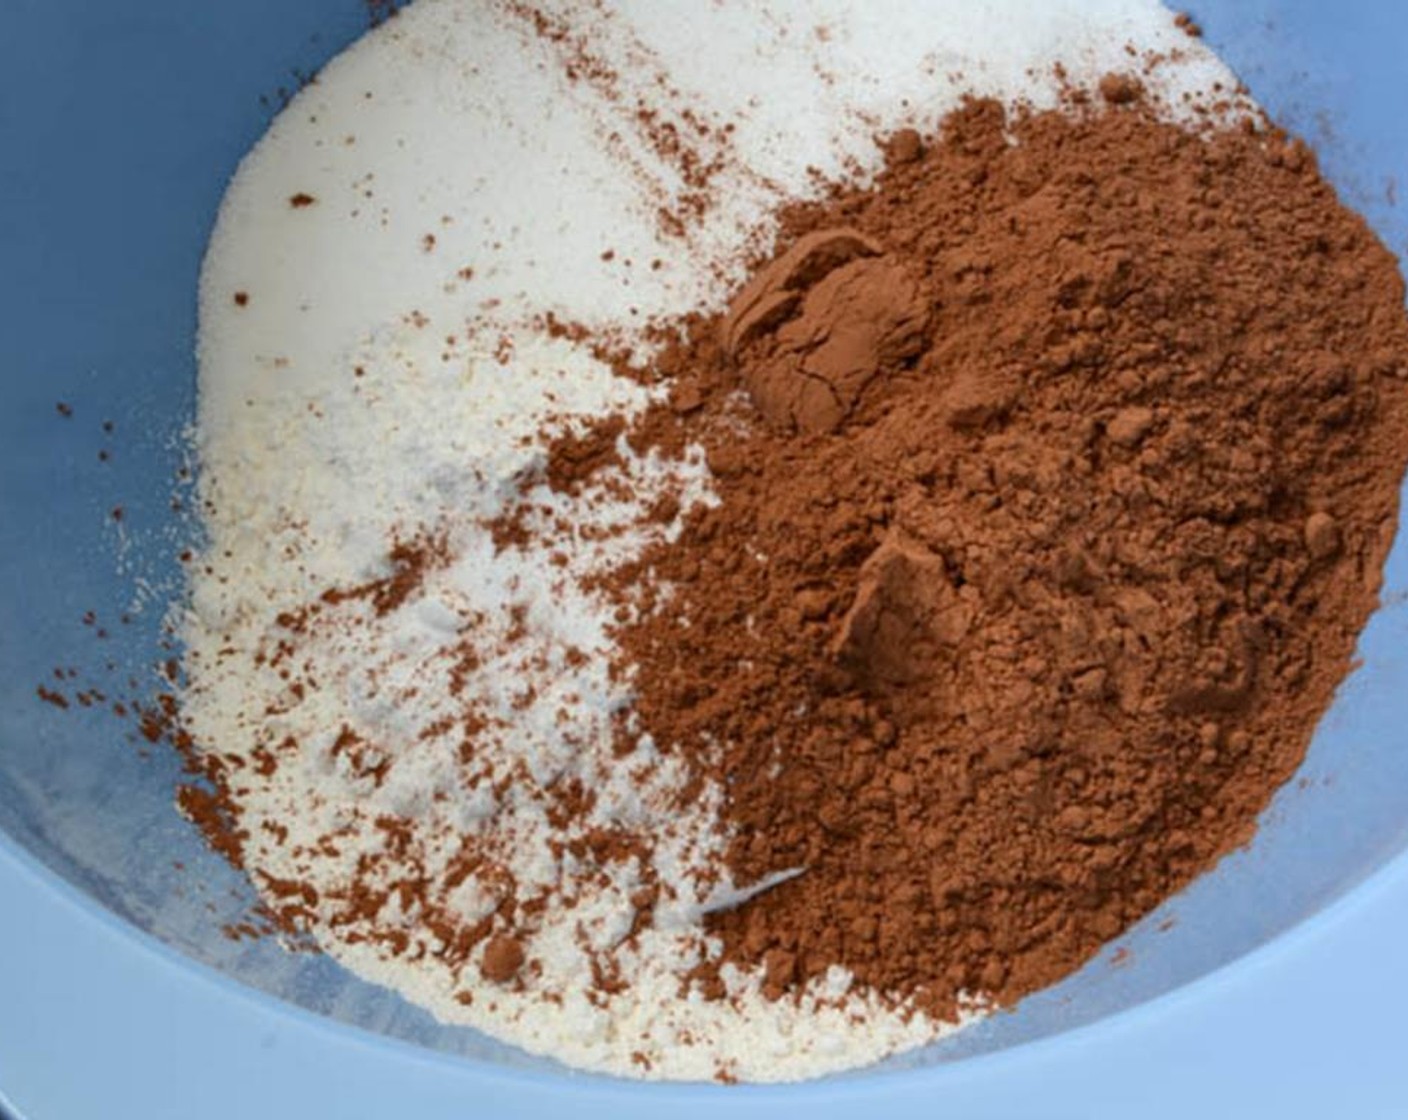 step 4 Combine the All-Purpose Flour (2 cups), Baking Soda (1 tsp), Granulated Sugar (1 1/2 cups), Salt (1/4 tsp) and Unsweetened Cocoa Powder (1/3 cup).